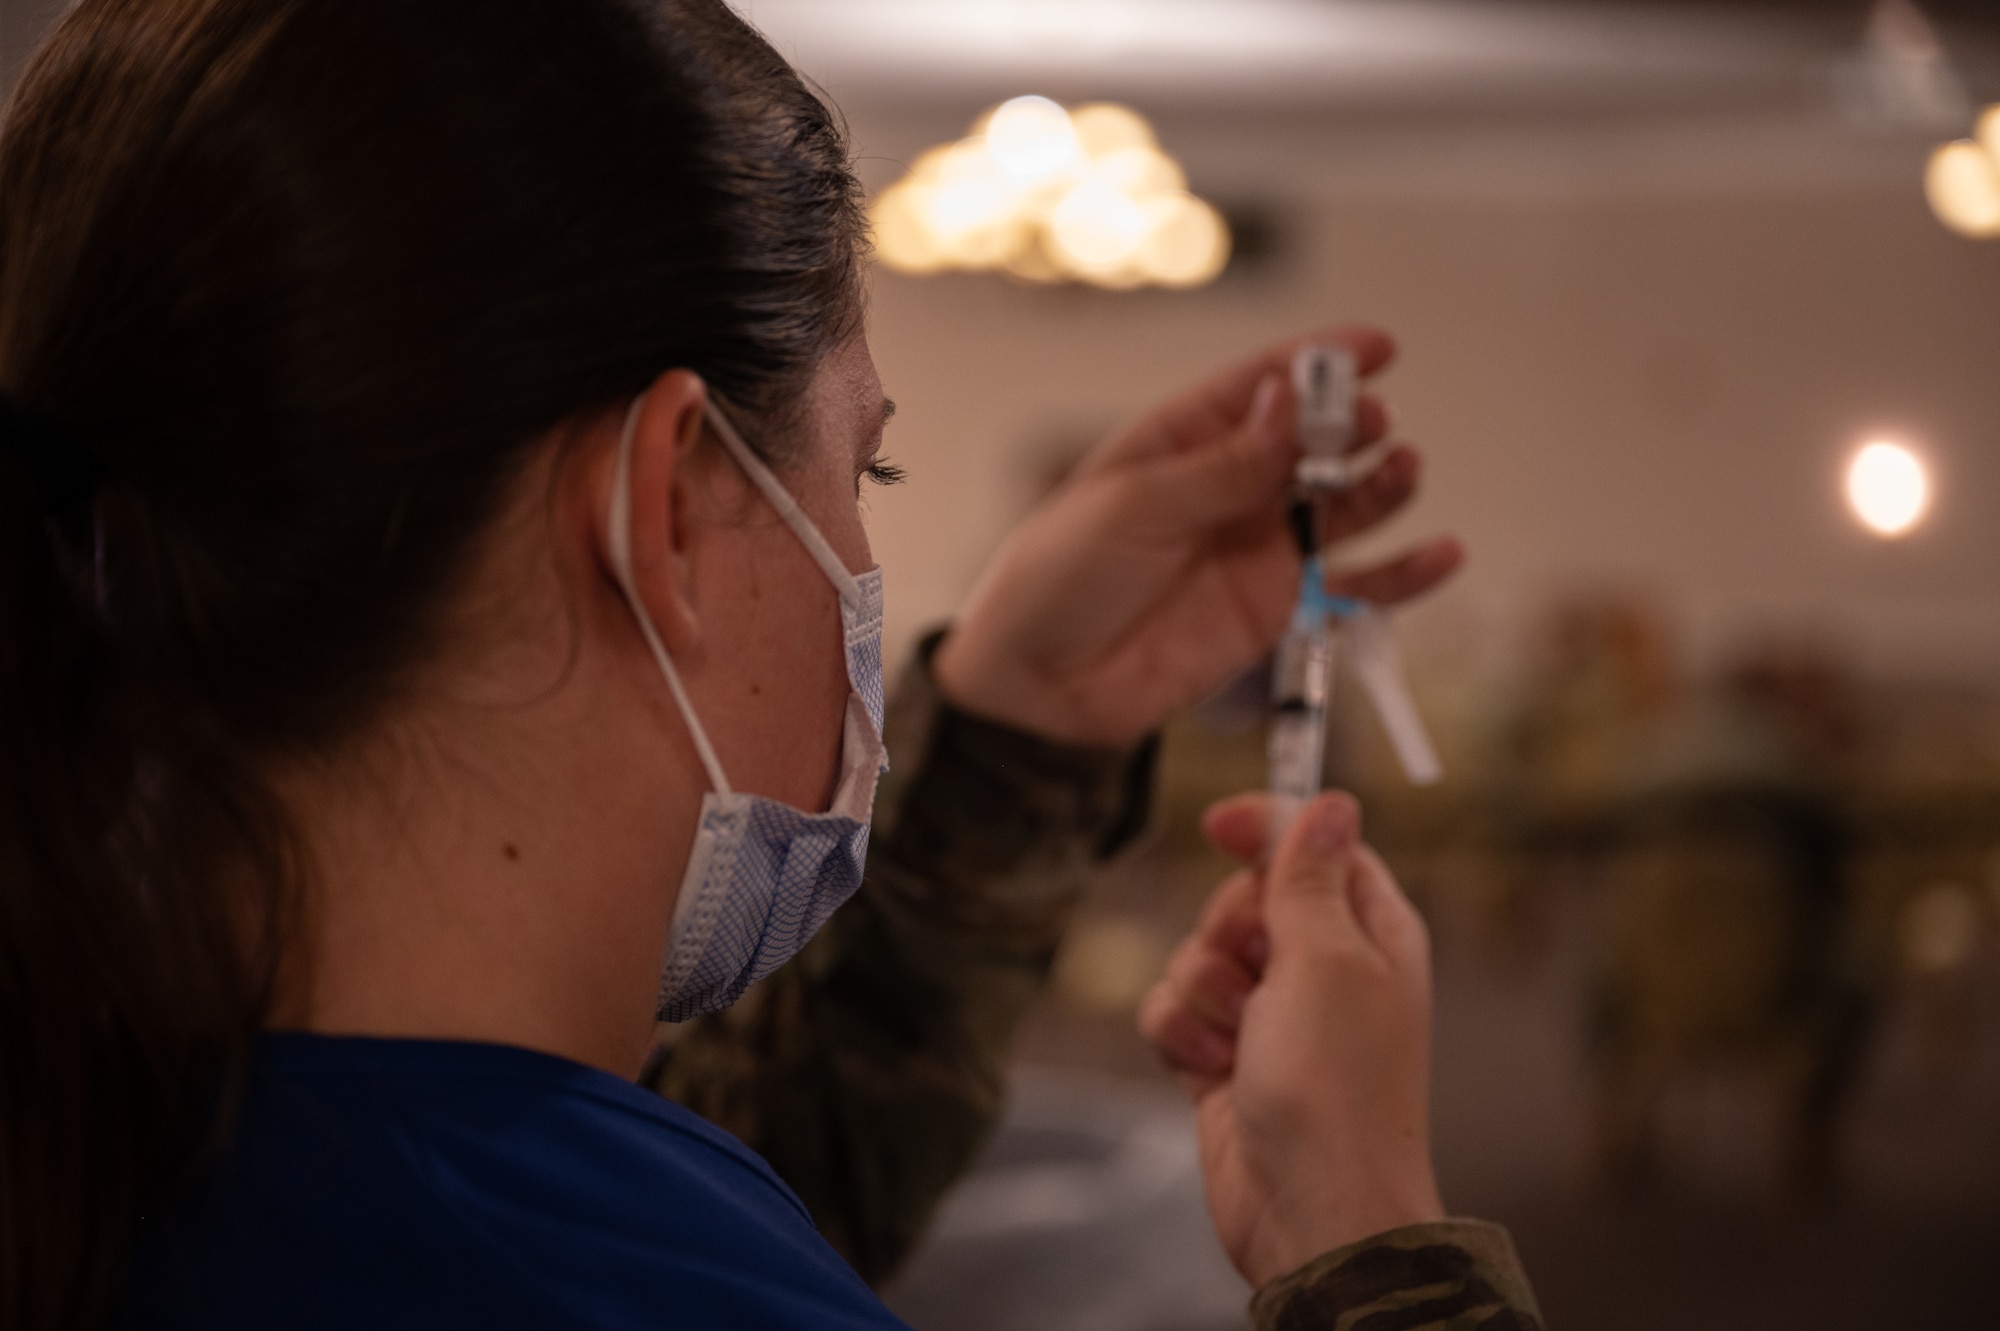 Vaccination of Airmen and Guardians enhances force health protection and readiness. This action is consistent with DoD mandatory vaccination programs for service members to address other health threats such as seasonal influenza.